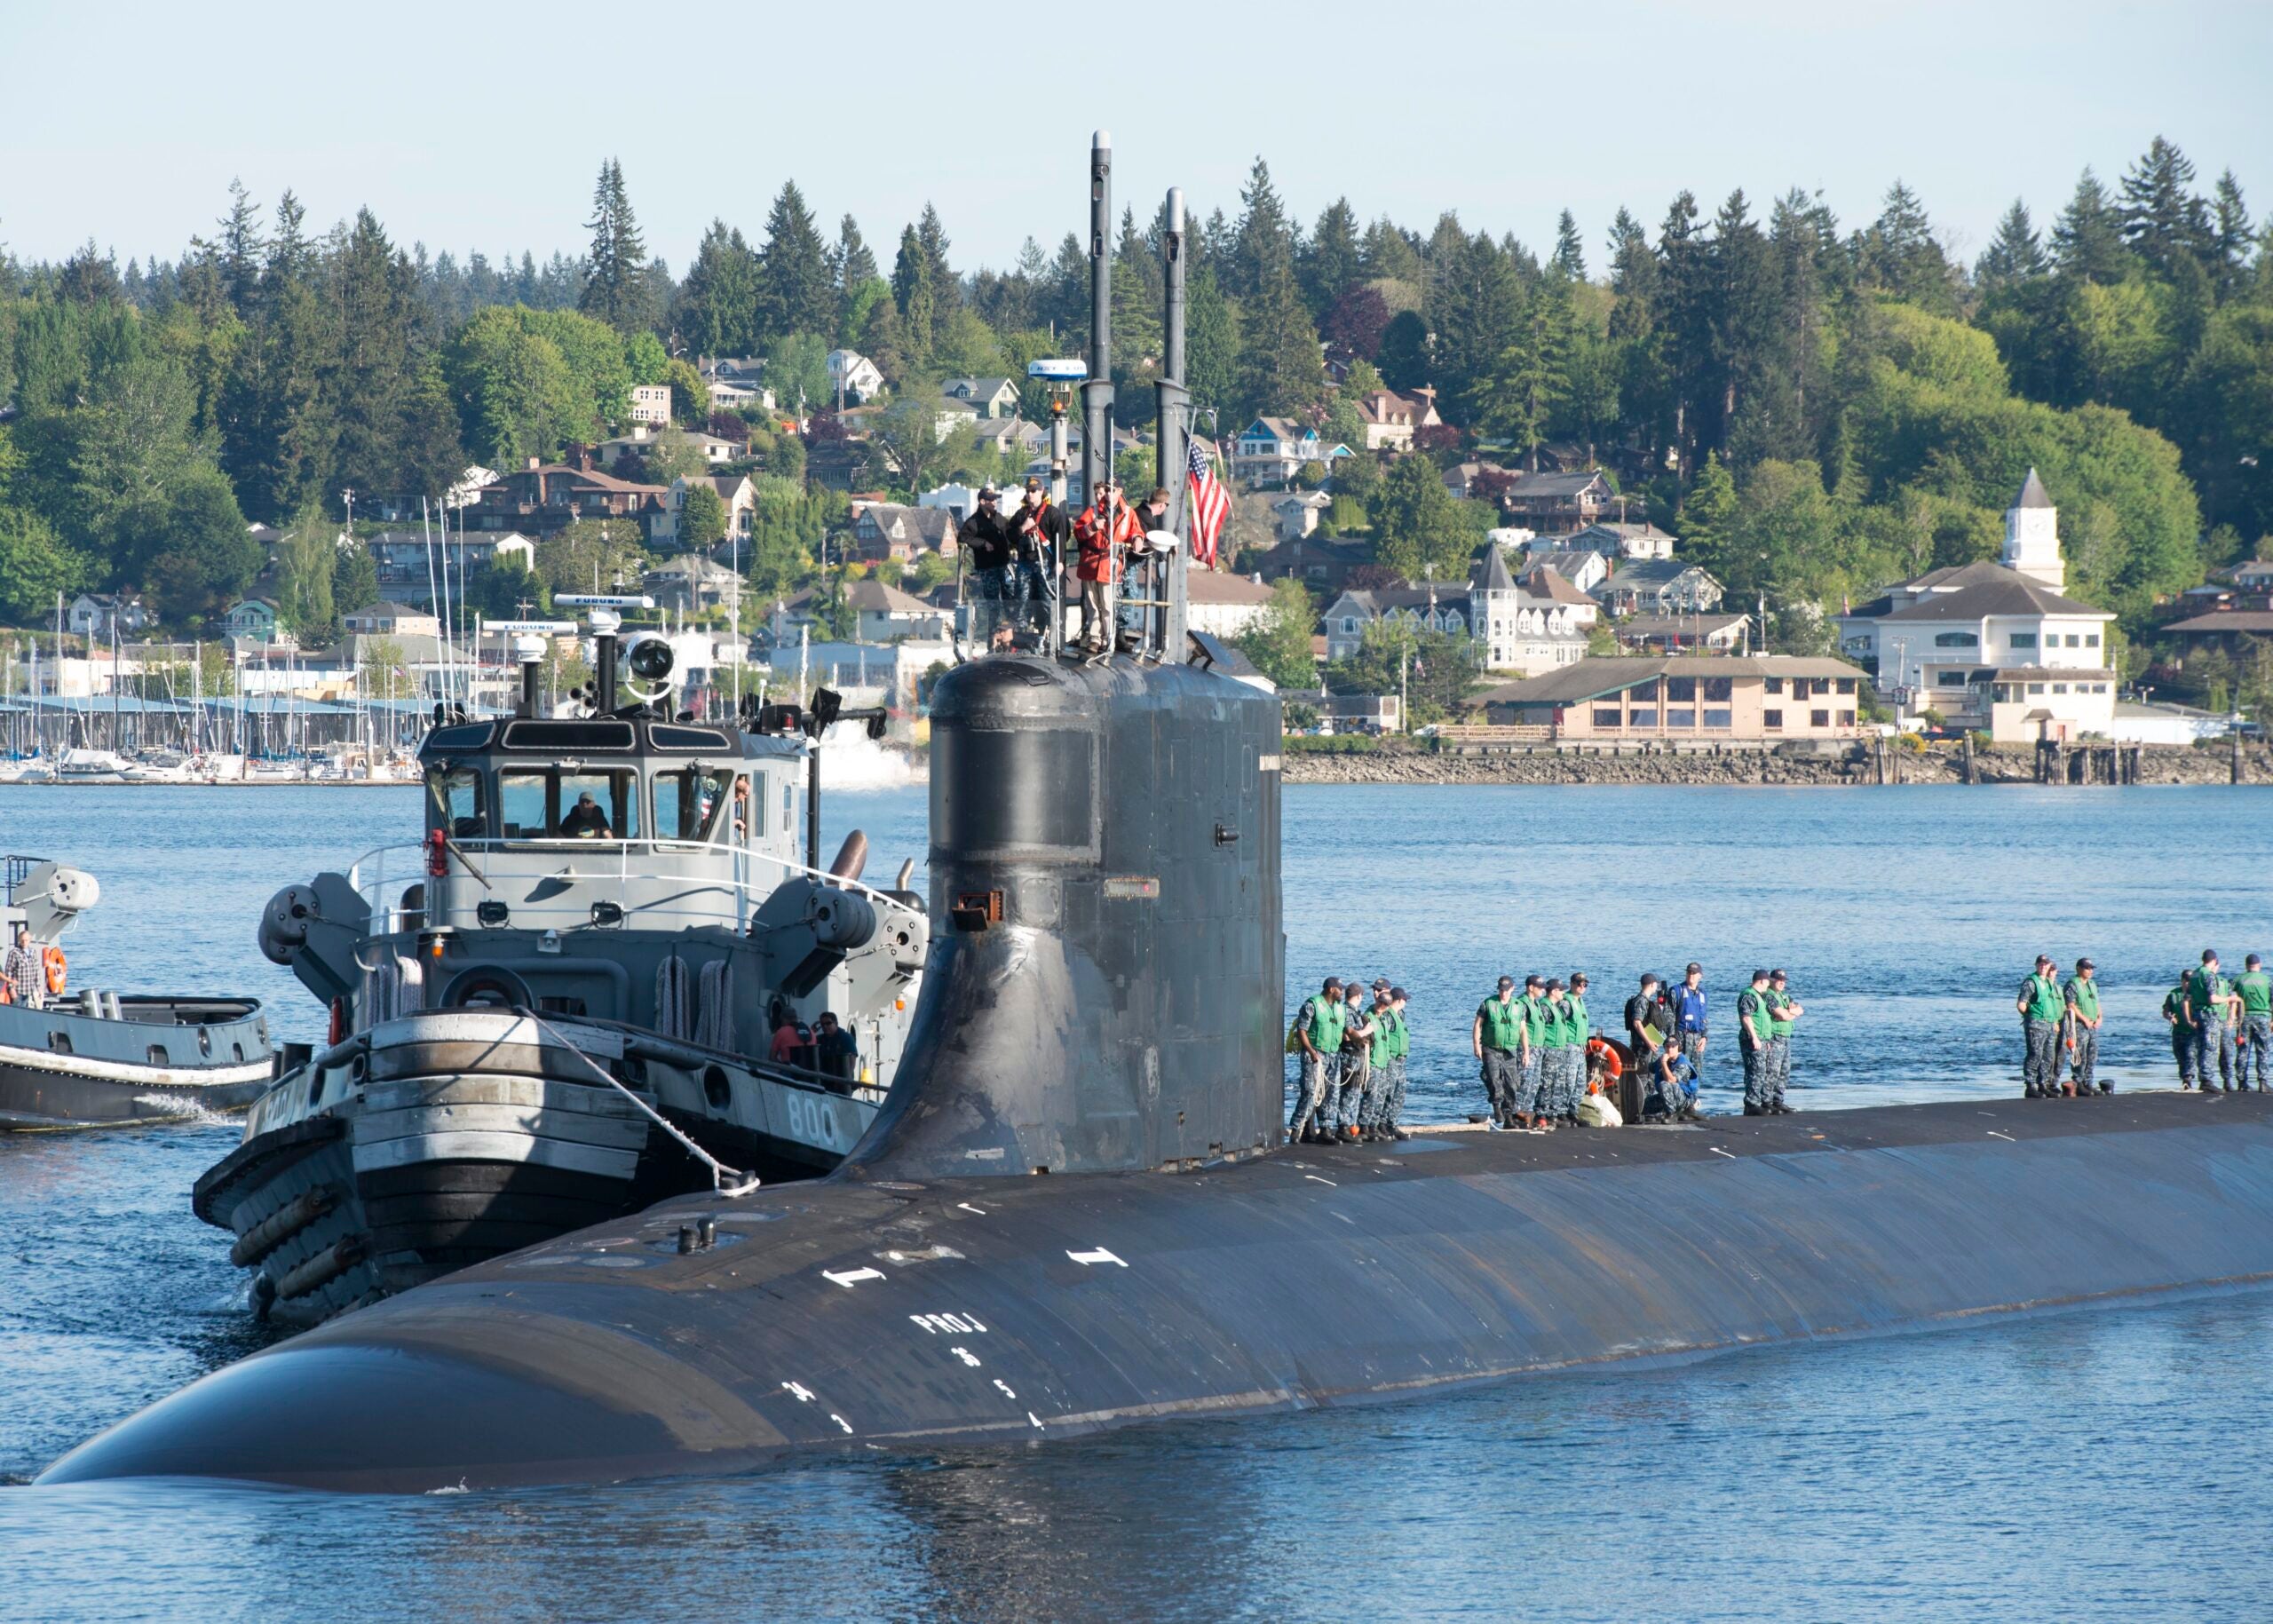 BREMERTON, Wash. (May 7, 2018) Sailors assigned to the Seawolf-class fast-attack submarine USS Connecticut (SSN 22) return home to Naval Base Kitsap-Bremerton after the completion of the multinational maritime Ice Exercise (ICEX) in the Arctic Circle. ICEX 2018 is a five-week exercise that allows the Navy to assess its operational readiness in the Arctic, increase experience in the region, advance understanding of the Arctic environment, and continue to develop relationships with other services, allies and partner organizations. (U.S. Navy photo by Mass Communication Specialist 1st Class Amanda R. Gray/Released)